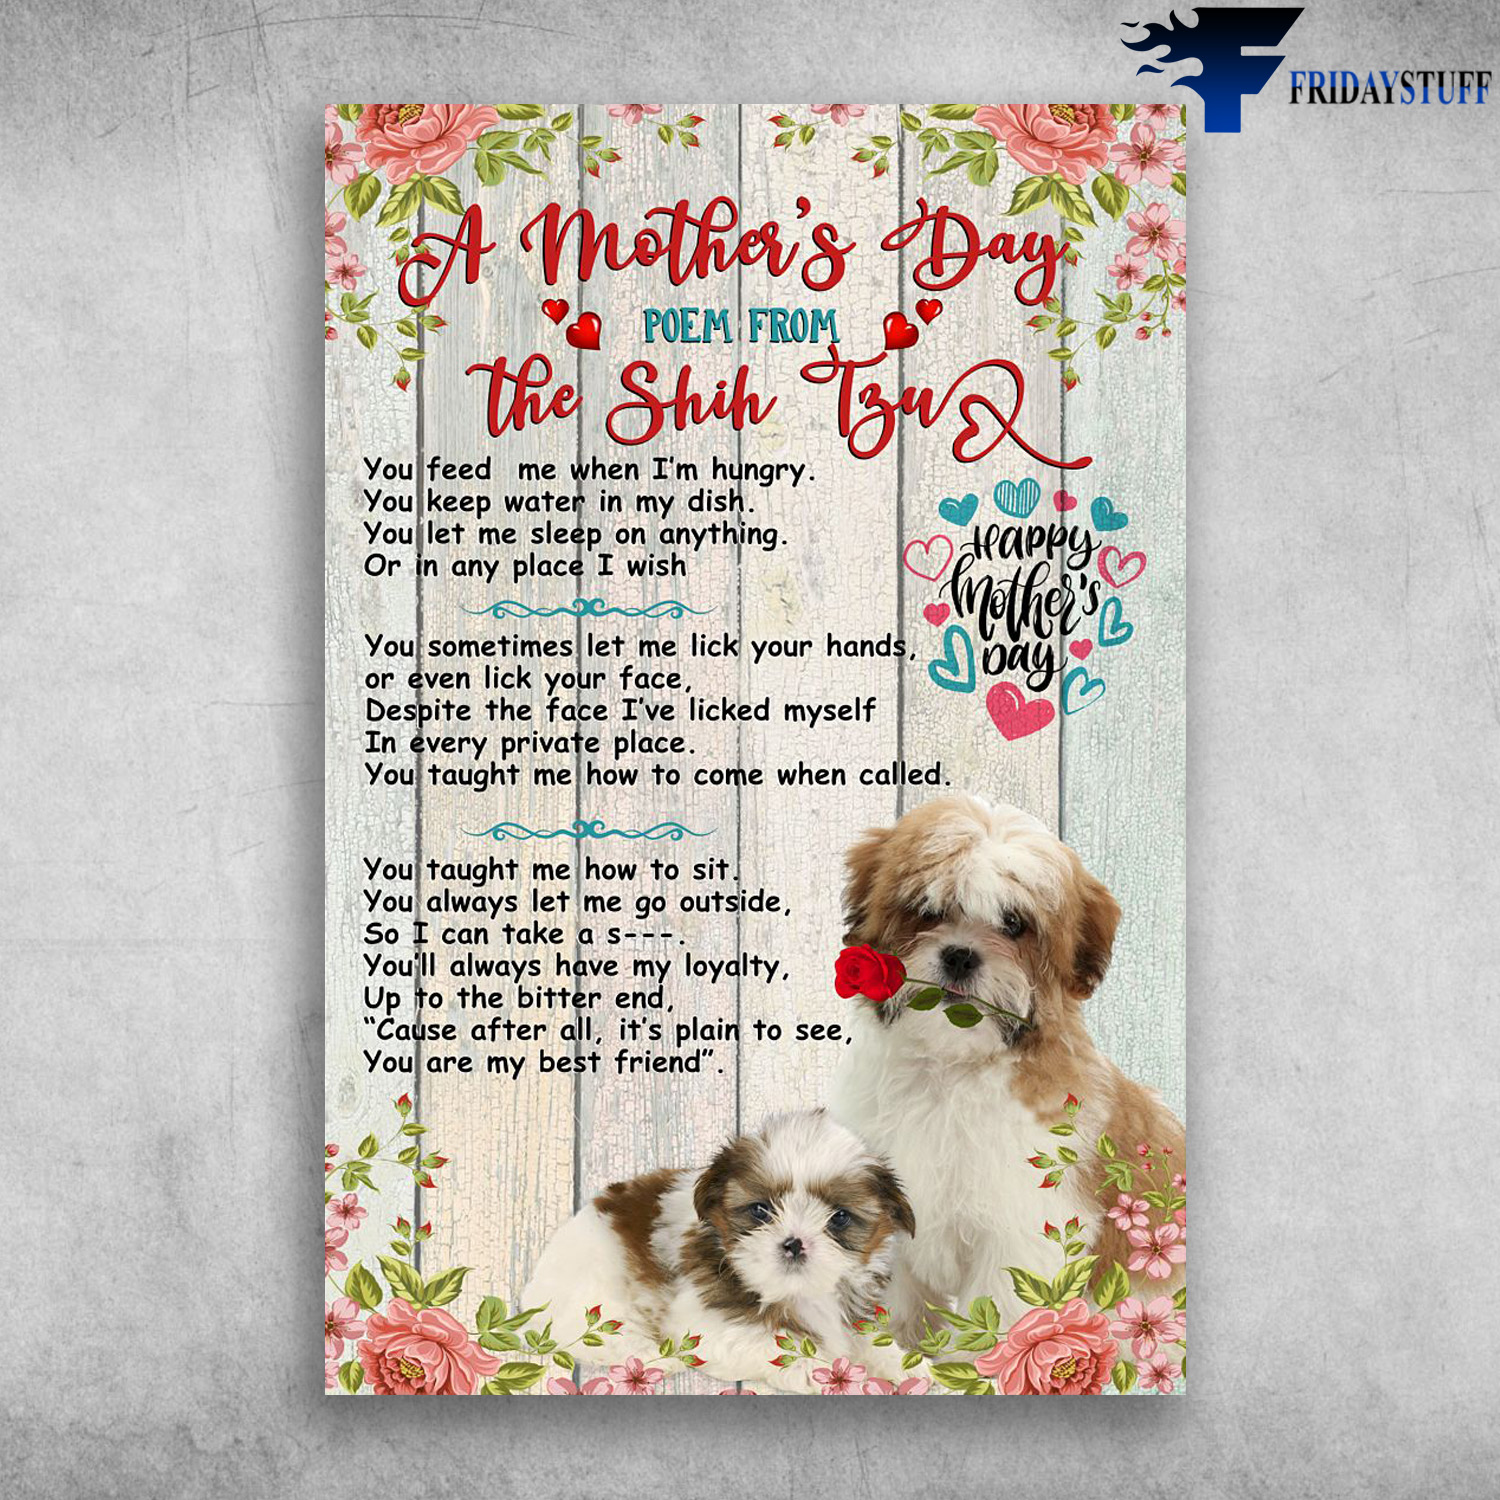 Shih Tzu Dog - A Mother's Day, Poem From The Shih Tzu, You Feed Me When I'm Hungry, You Keep Water In My Dish, You Let Me Sleep On Anything, Or In Any Place I Wish, You Sometimes Let Me Lick Your Hands Or Even Lick Your Face